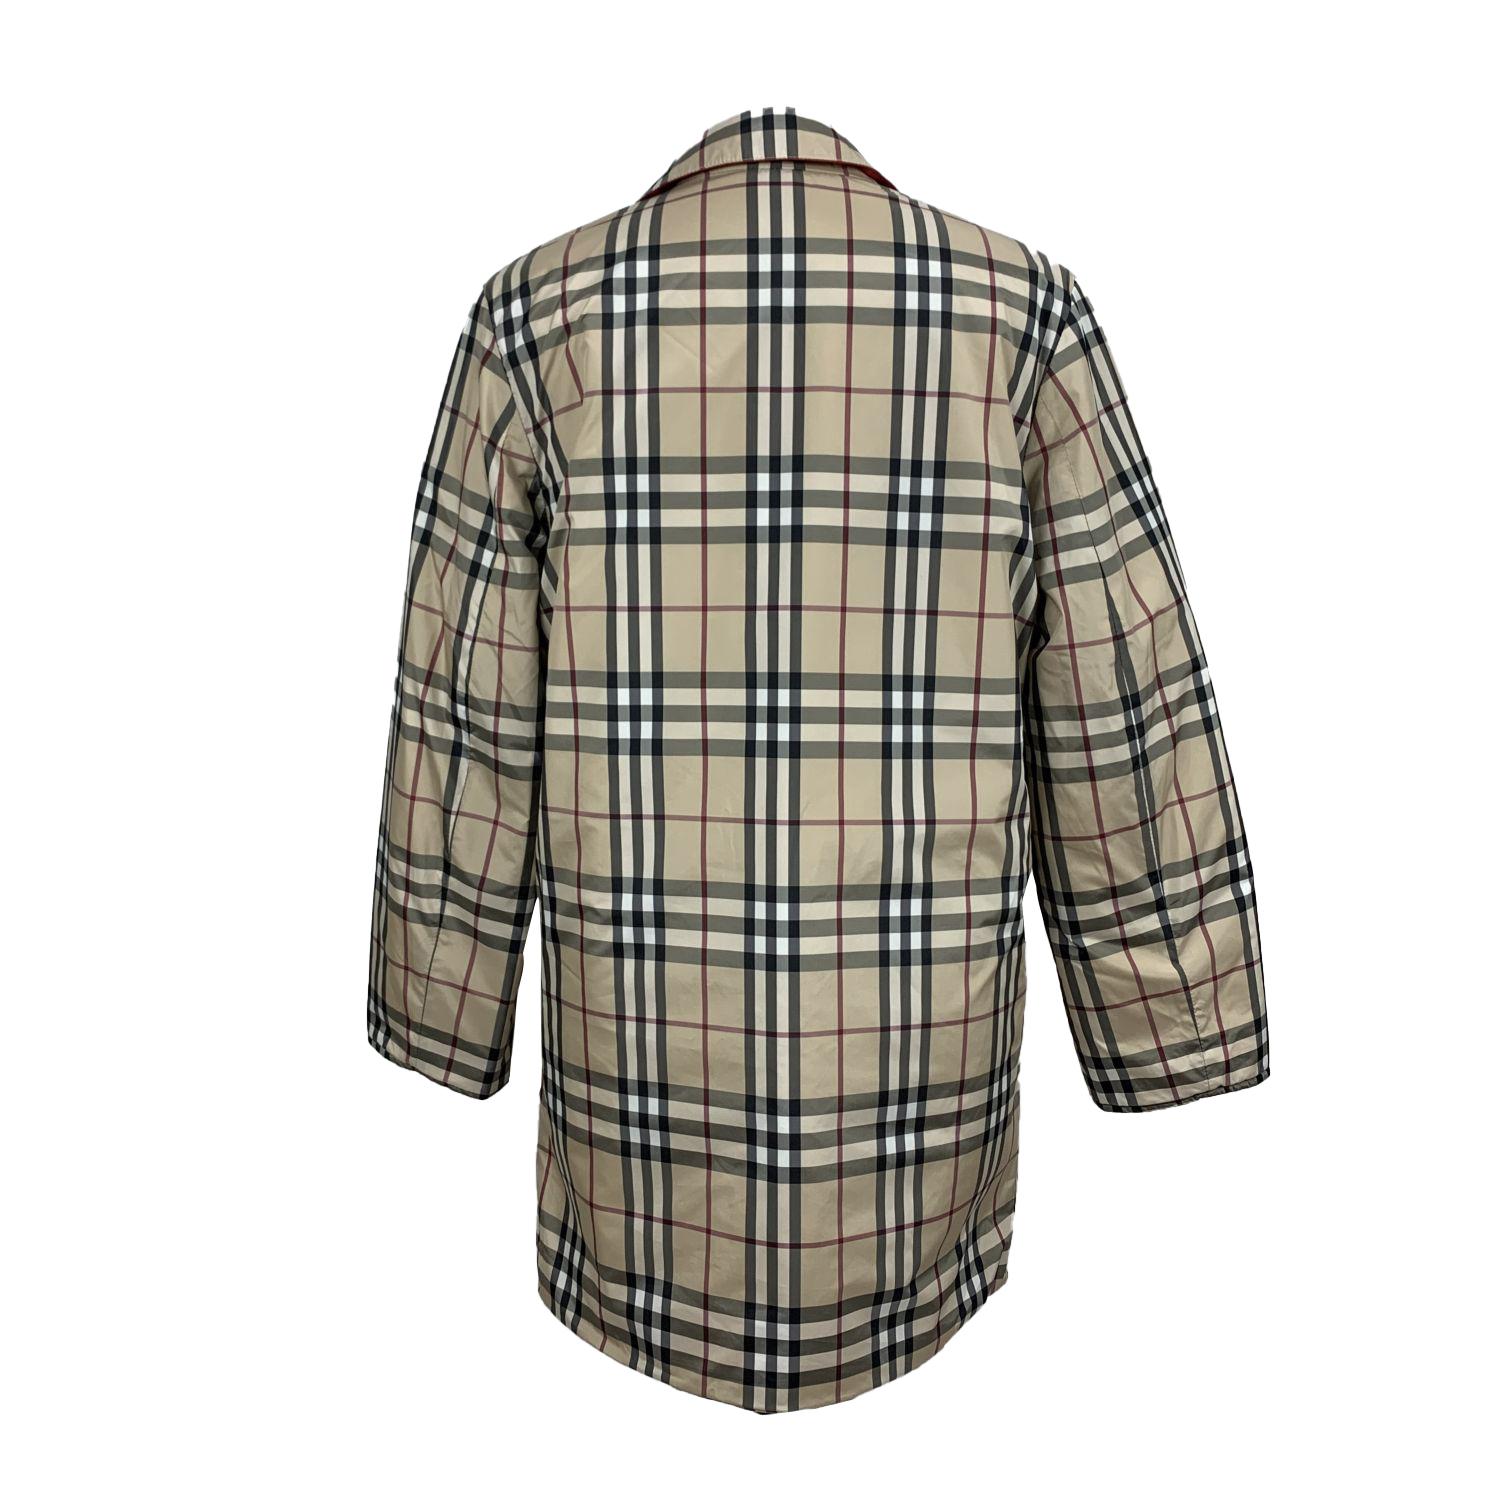 Beautiful Burberry reversible jacket. Composition: 99% Polyester, 1% Polyester. First side is in the iconic beige nova check pattern. The reversed side is red polyester. Lightly padded. Collared neckline. Front button closure. Slash pockets on the